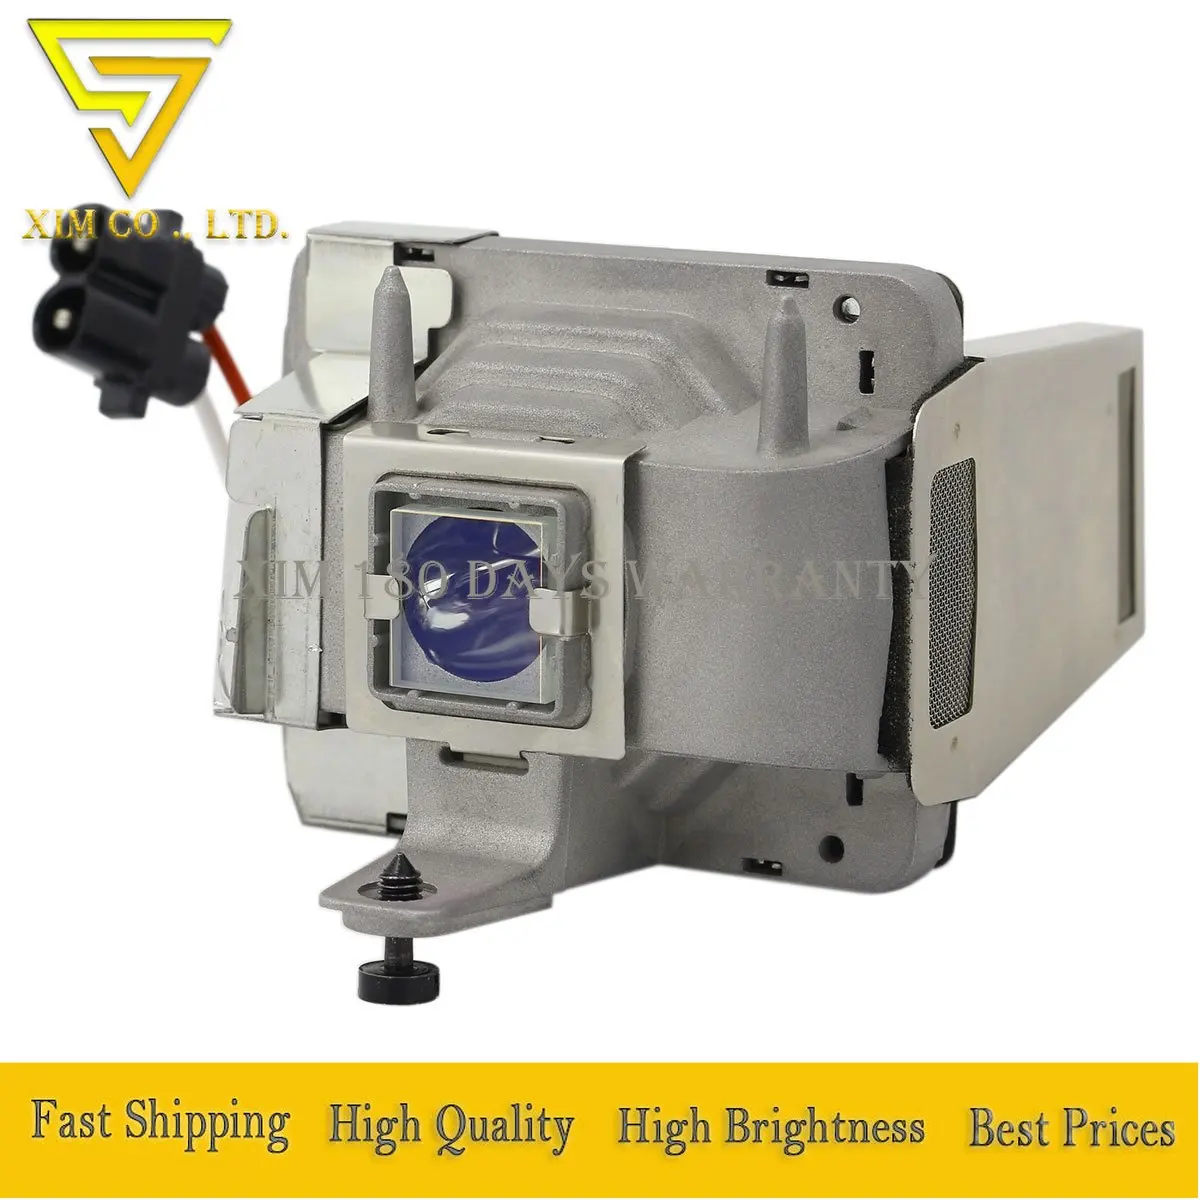 SP-LAMP-026/SP-LAMP-019 lamp for INFOCUS IN35 IN35EP IN35W IN35WEP IN36 IN37 IN37WEP IN65W IN67 LPX8 X8 IN37EP IN65 C250 C250 high quality replacement projector lamp sp lamp 026 bulb for infocus in35 in35w in36 in37 in65w in67 lpx8 x8 in65 c250 c250w